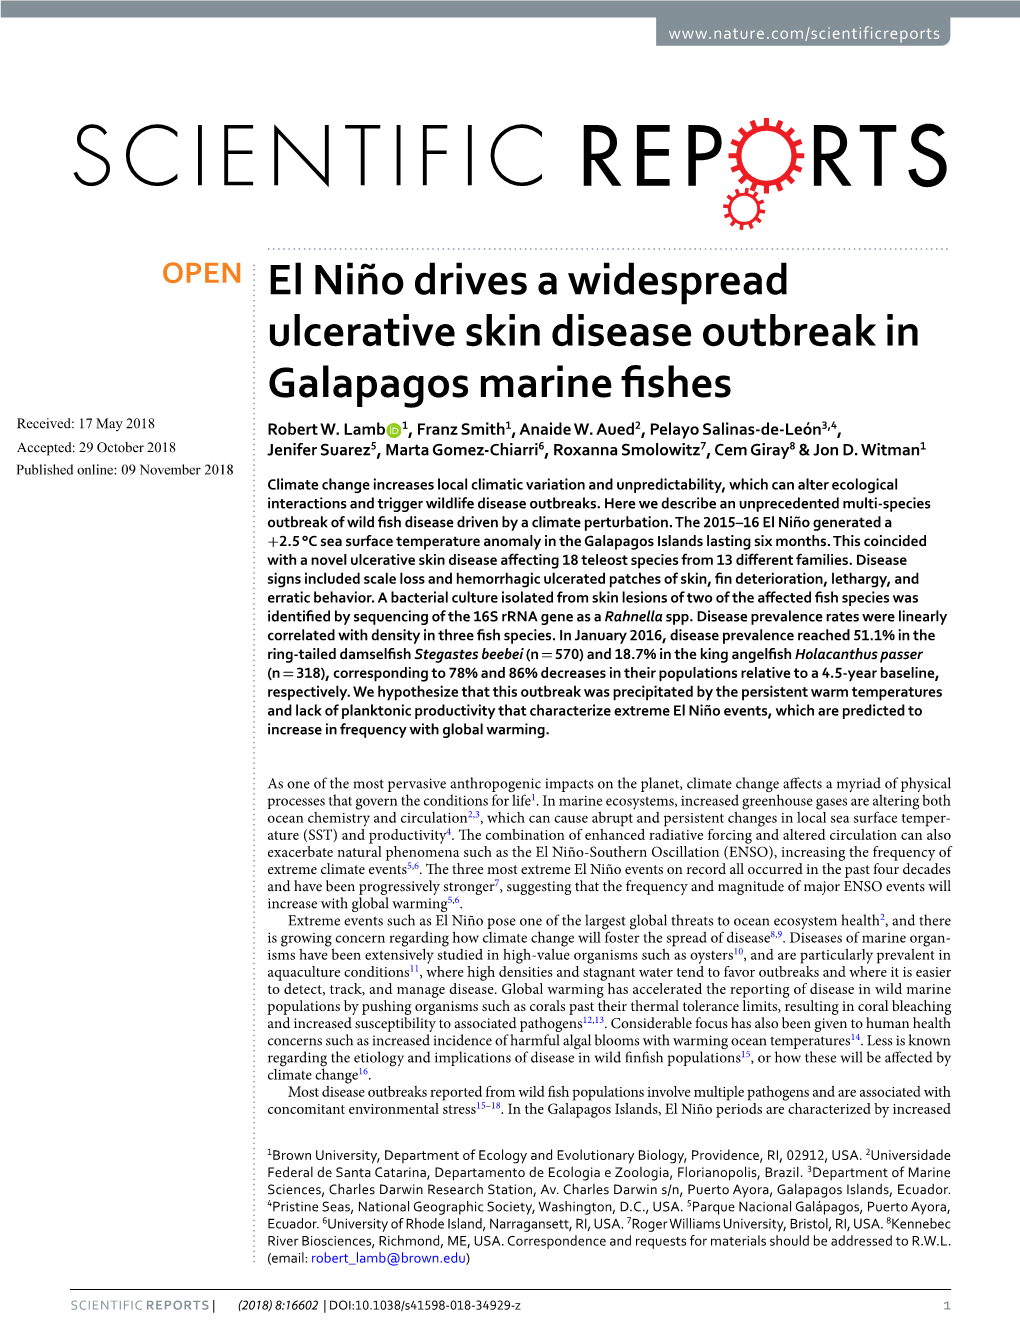 El Niño Drives a Widespread Ulcerative Skin Disease Outbreak in Galapagos Marine Fshes Received: 17 May 2018 Robert W